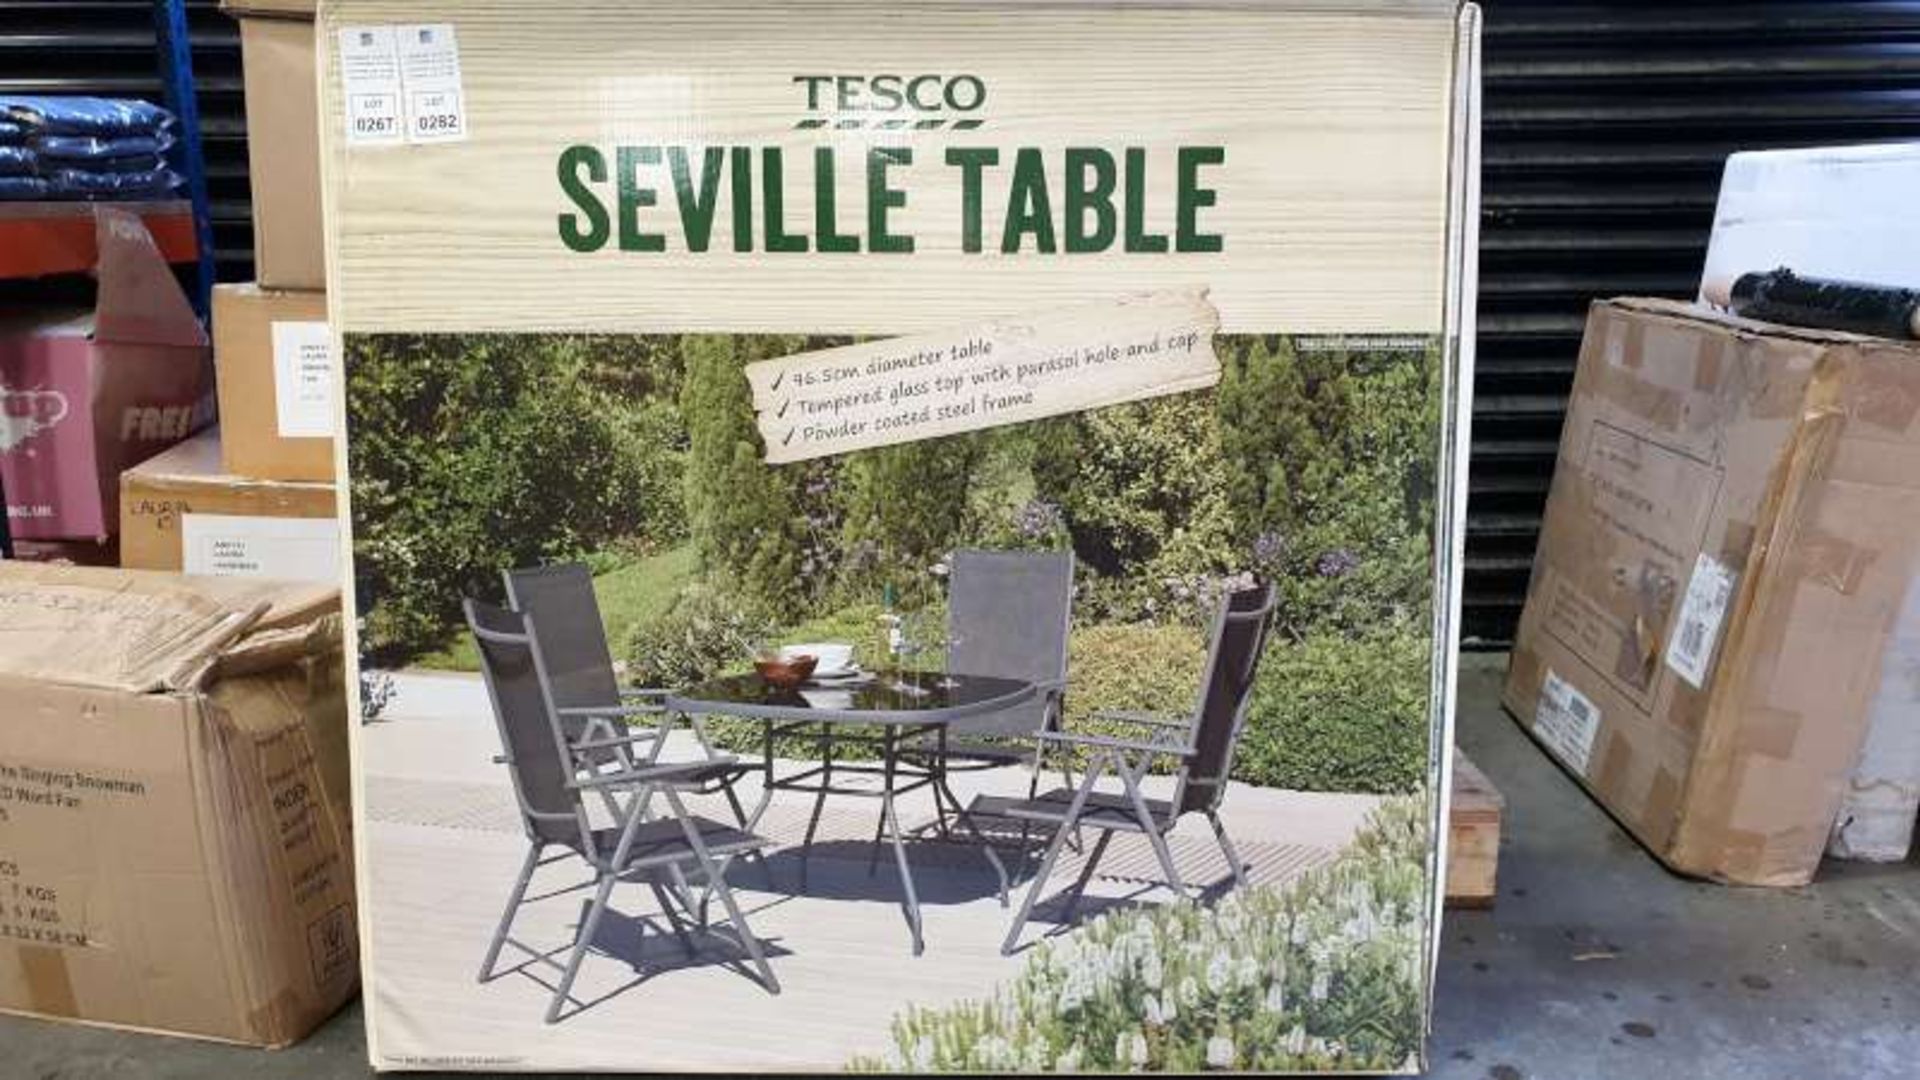 5 X BRAND NEW BOXED SEVILLE TEMPERED GLASS TOP GARDEN TABLES ( DIAMETER OF TABLE 96.5 CM )